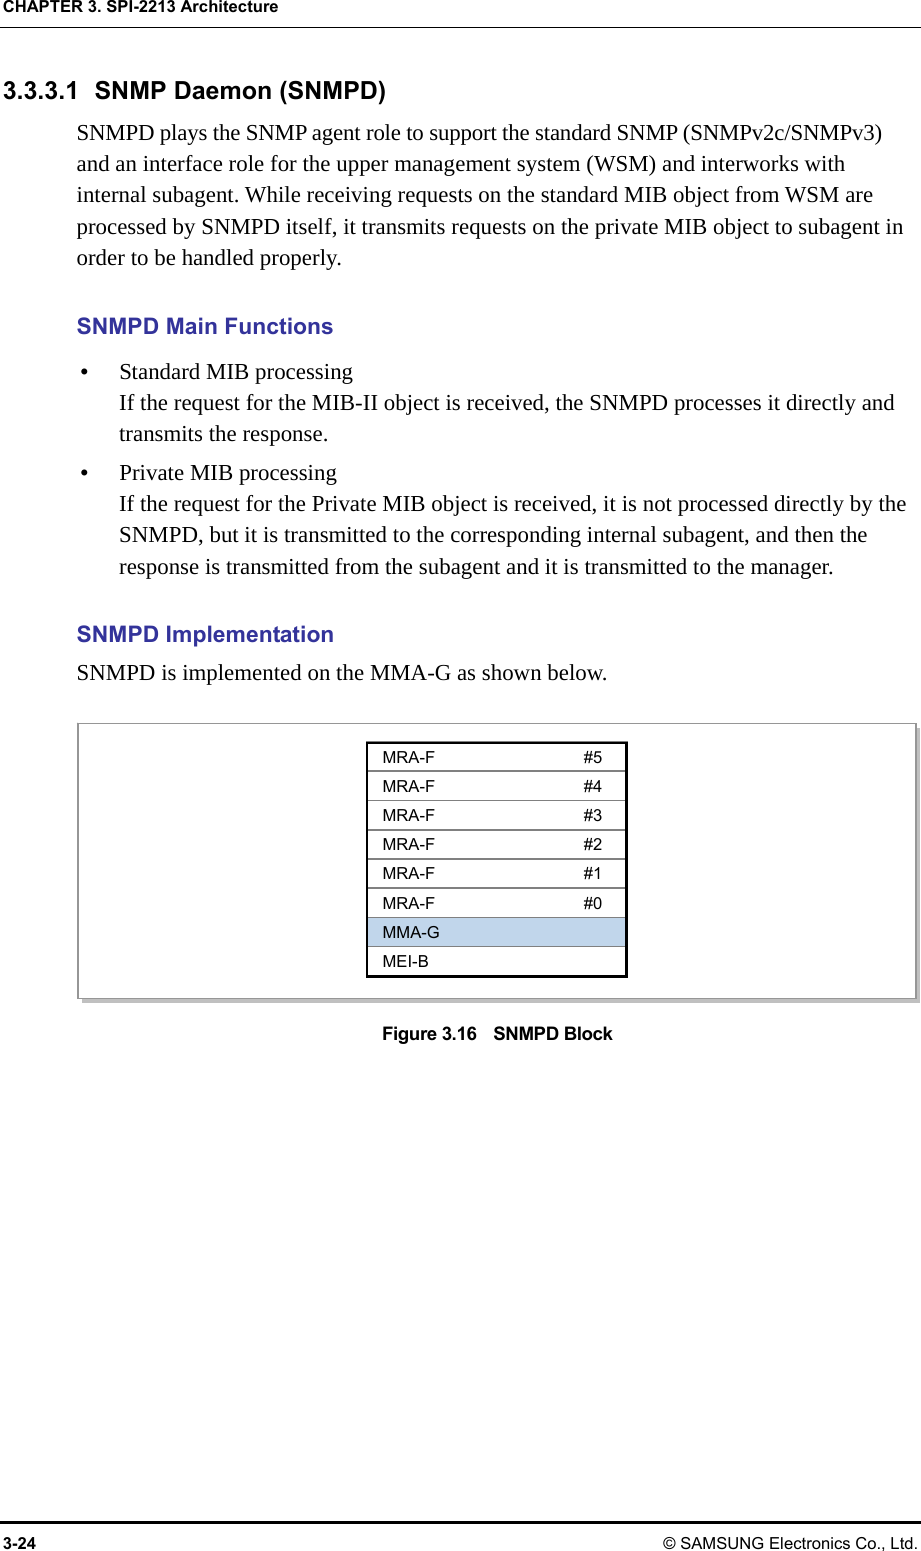 CHAPTER 3. SPI-2213 Architecture 3-24 © SAMSUNG Electronics Co., Ltd. 3.3.3.1  SNMP Daemon (SNMPD) SNMPD plays the SNMP agent role to support the standard SNMP (SNMPv2c/SNMPv3) and an interface role for the upper management system (WSM) and interworks with internal subagent. While receiving requests on the standard MIB object from WSM are processed by SNMPD itself, it transmits requests on the private MIB object to subagent in order to be handled properly.  SNMPD Main Functions y Standard MIB processing If the request for the MIB-II object is received, the SNMPD processes it directly and transmits the response. y Private MIB processing If the request for the Private MIB object is received, it is not processed directly by the SNMPD, but it is transmitted to the corresponding internal subagent, and then the response is transmitted from the subagent and it is transmitted to the manager.  SNMPD Implementation SNMPD is implemented on the MMA-G as shown below.  Figure 3.16    SNMPD Block  MRA-F #5 MRA-F #4 MRA-F #3 MRA-F #2 MRA-F #1 MRA-F #0 MMA-G MEI-B